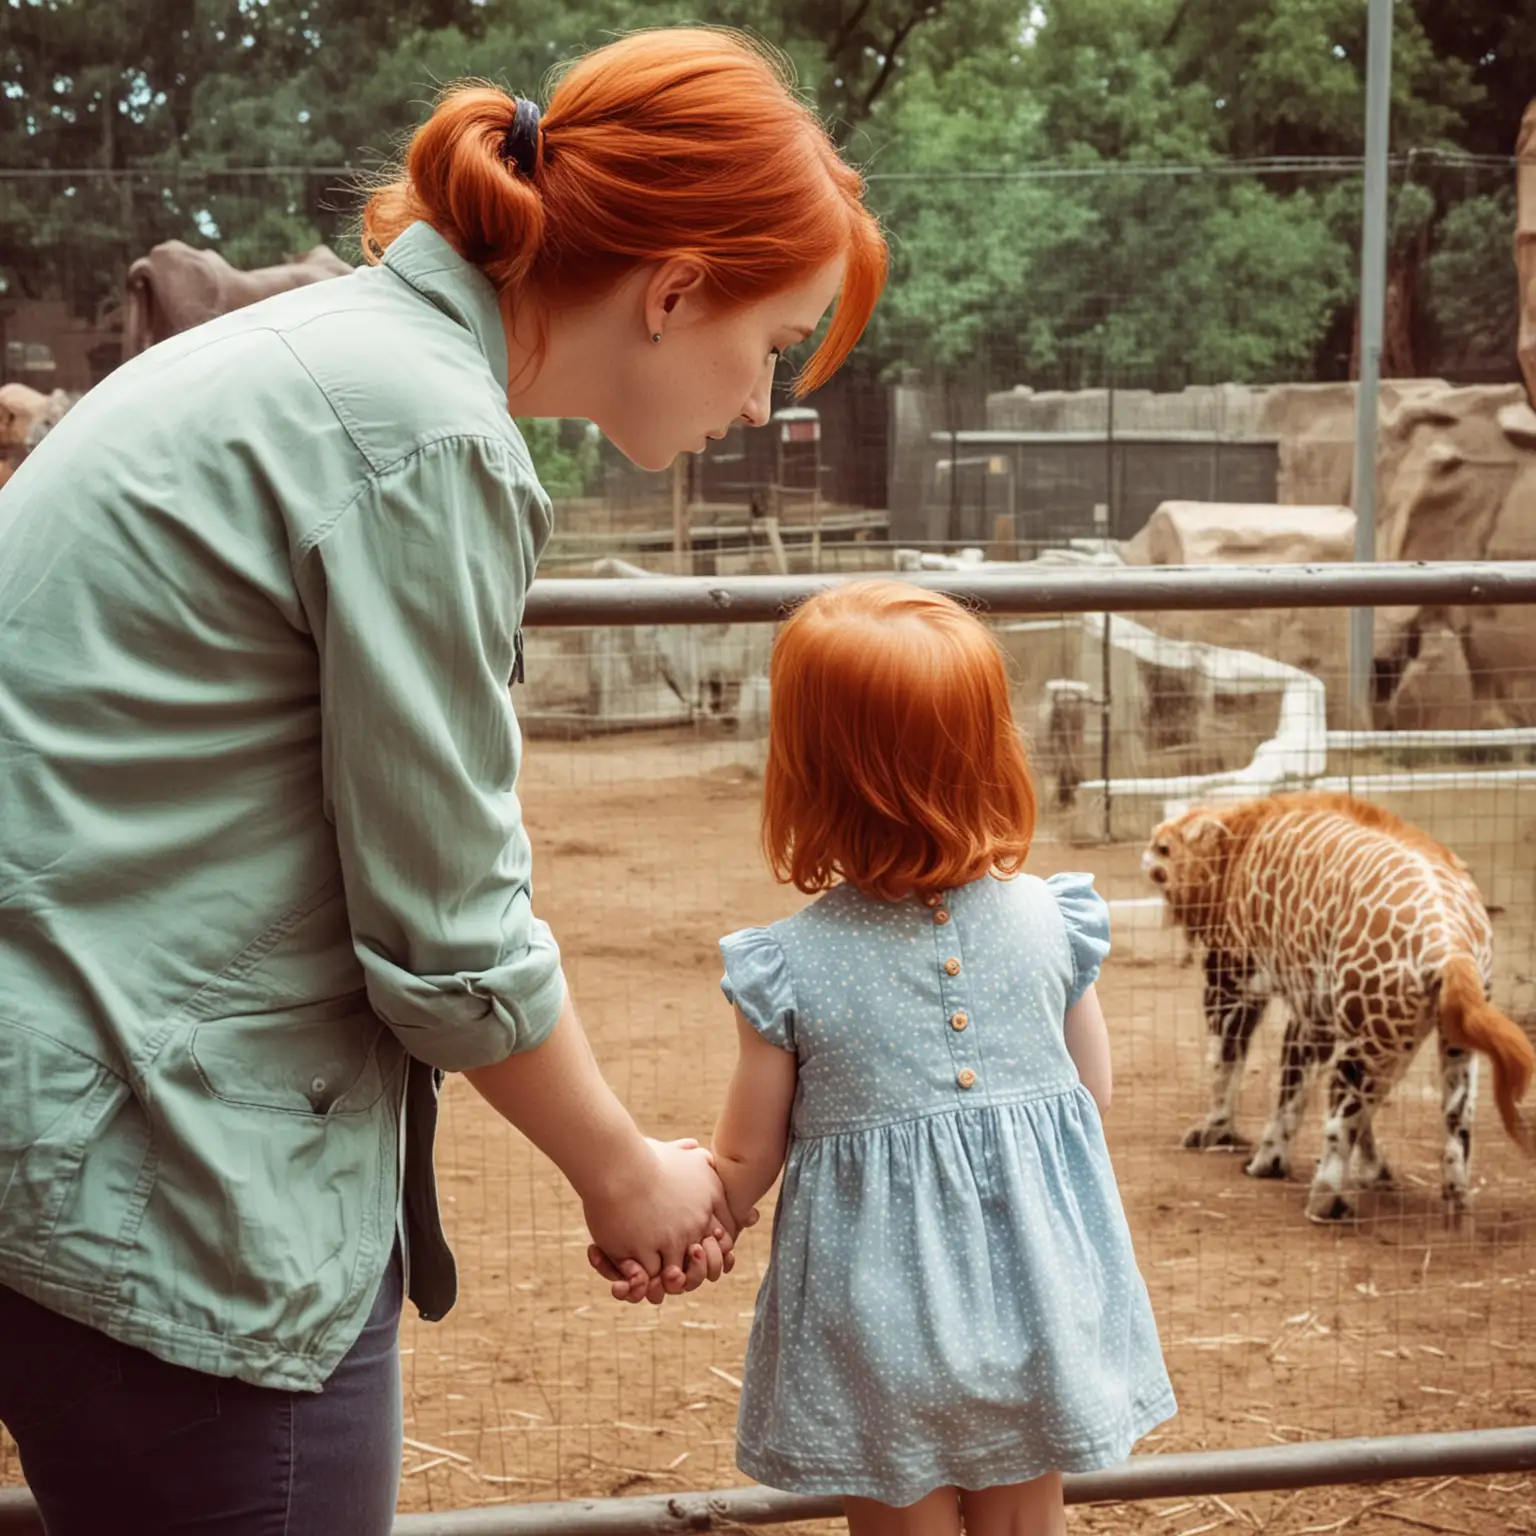 RedHaired Girl and Parent Observing Zoo Animal